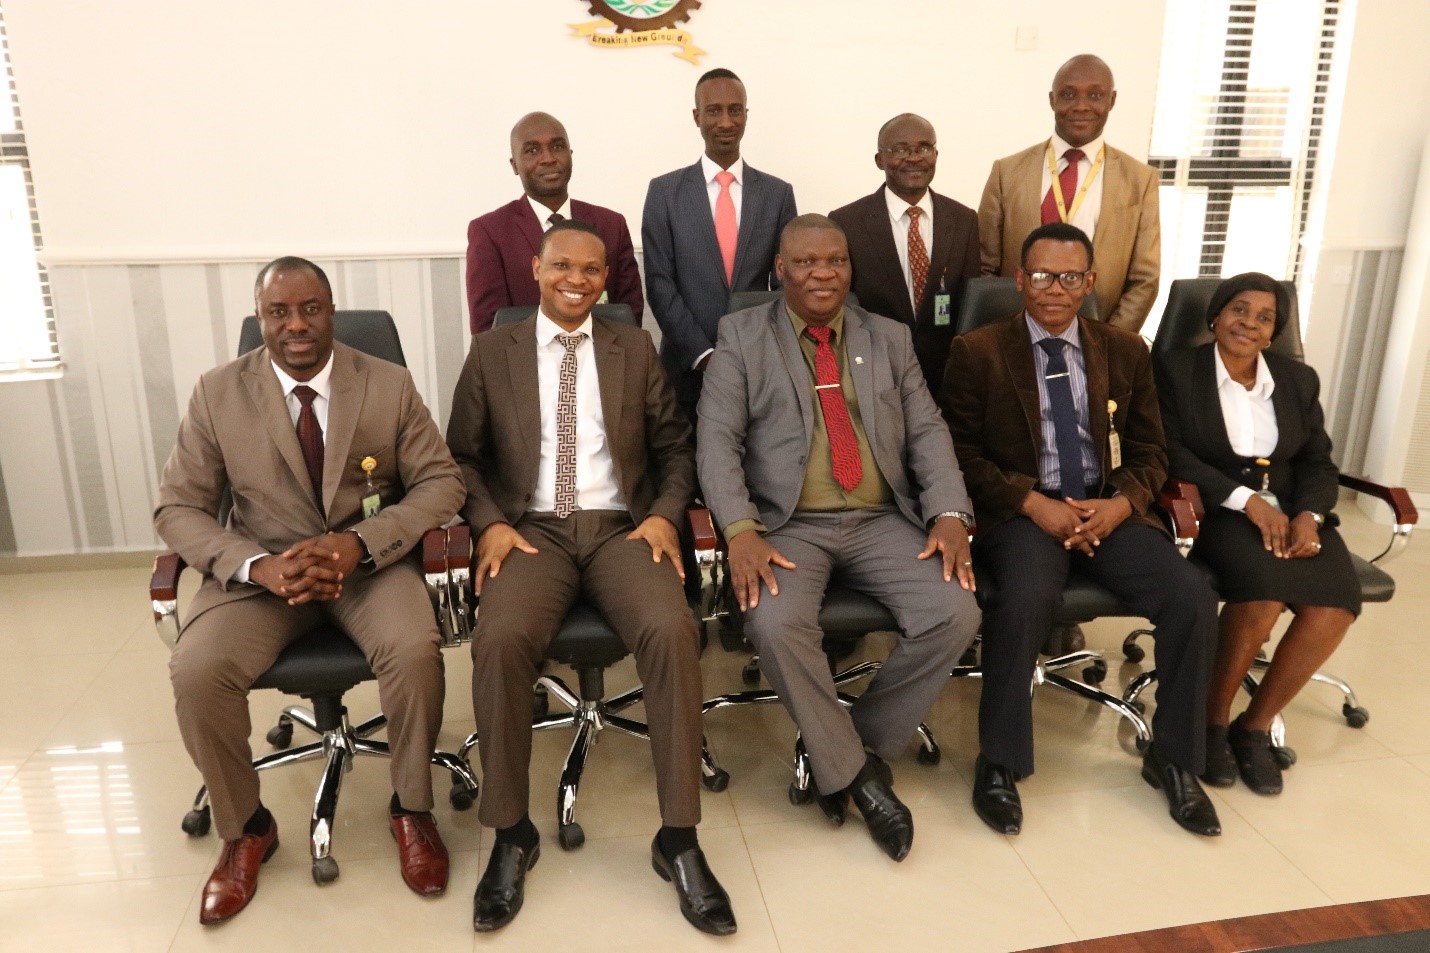 LMU Management with the immediate past LUSS Governing Council members